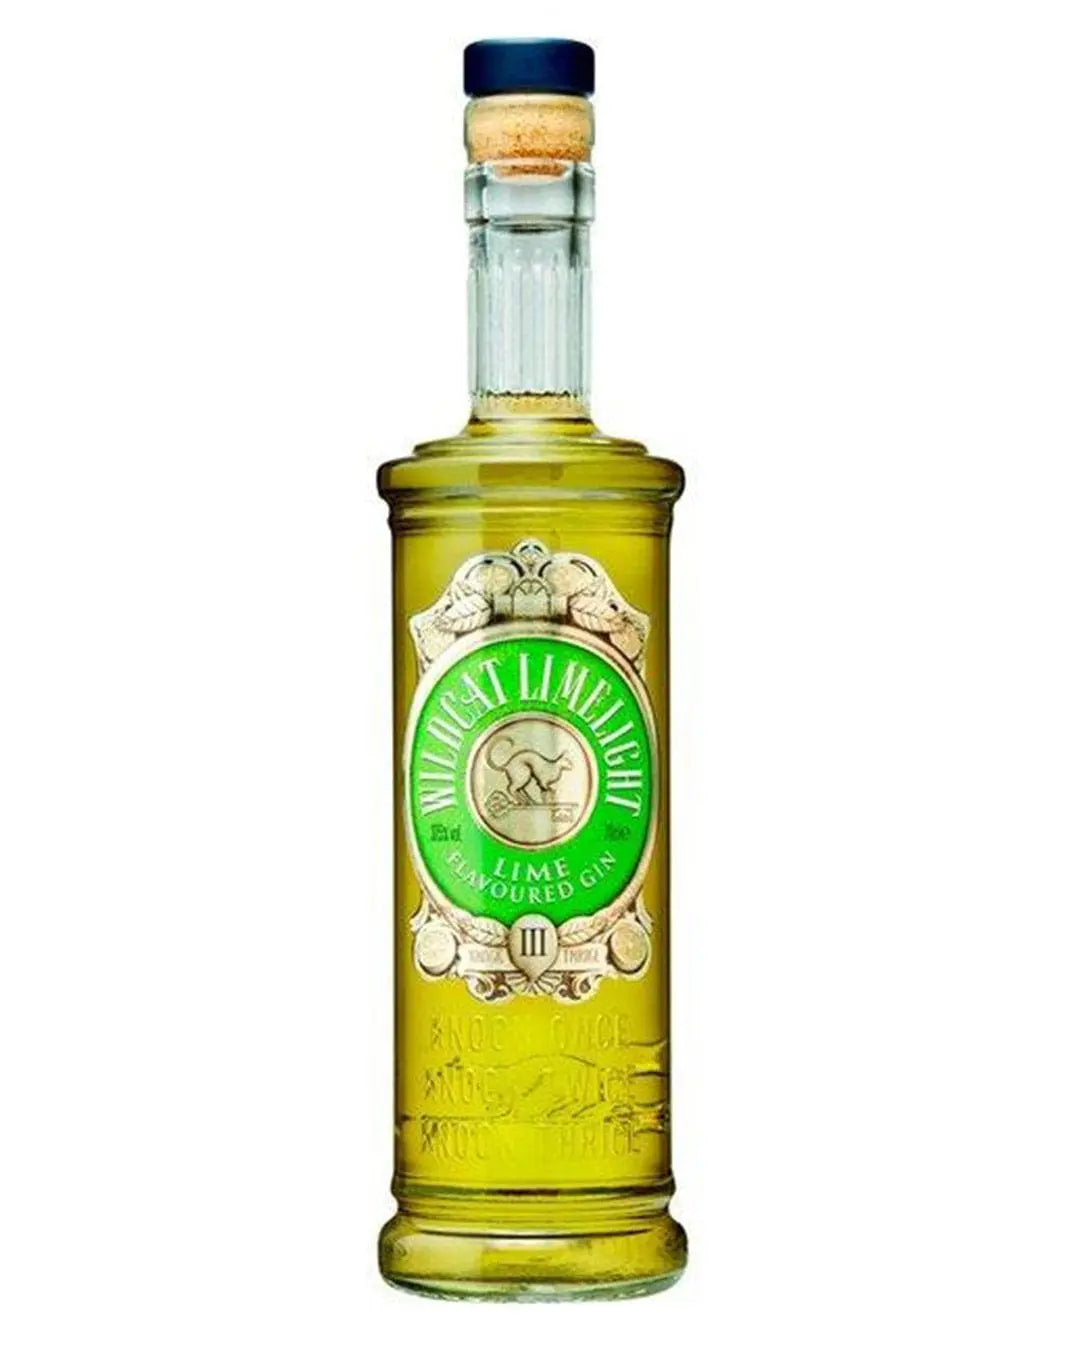 Wildcat Limelight Lime Flavoured Gin, 70 cl Gin 5013967016668